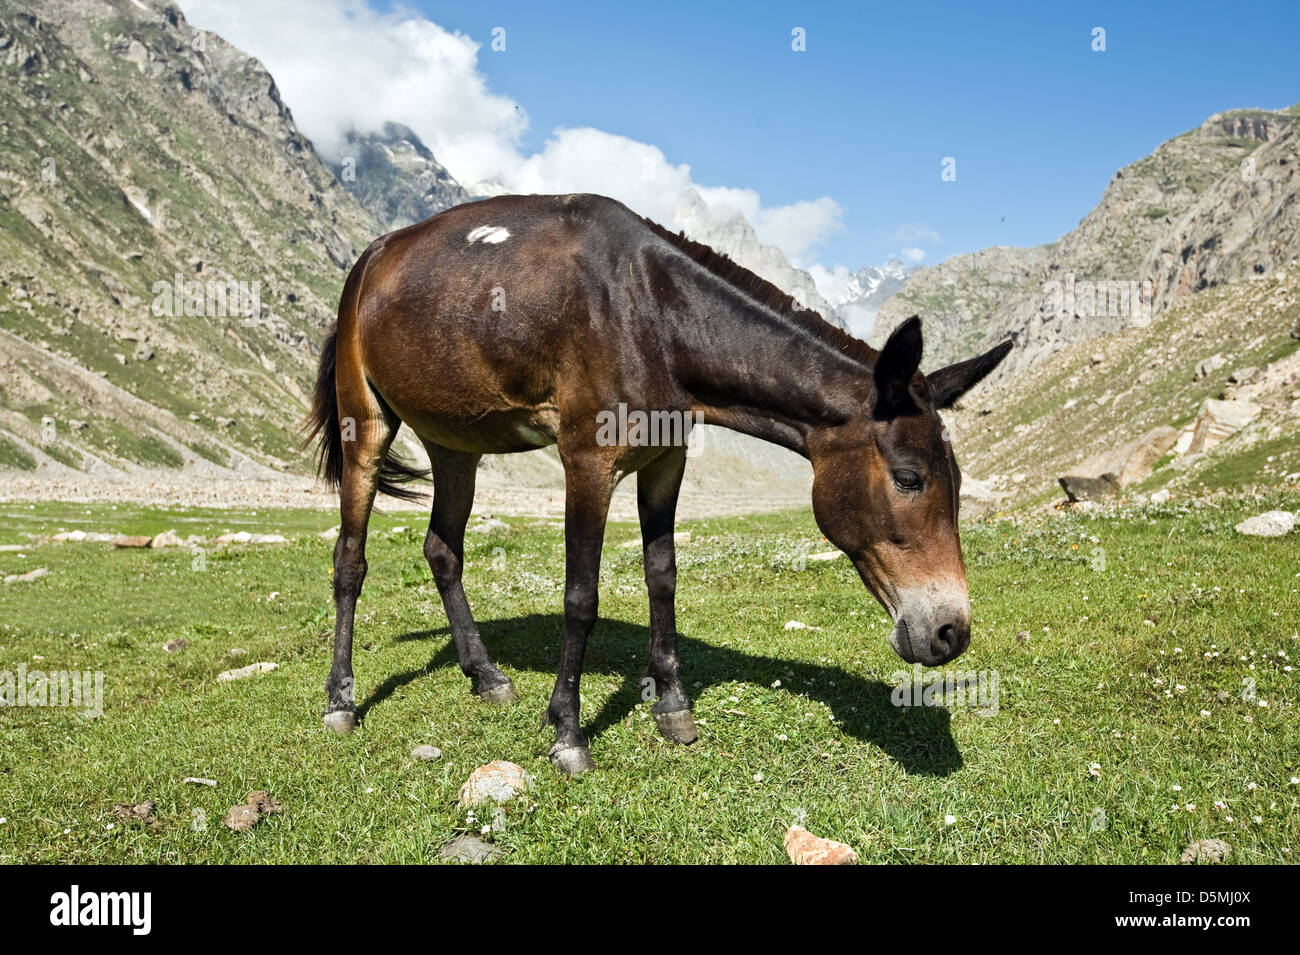 brown horse in mountain hill Stock Photo